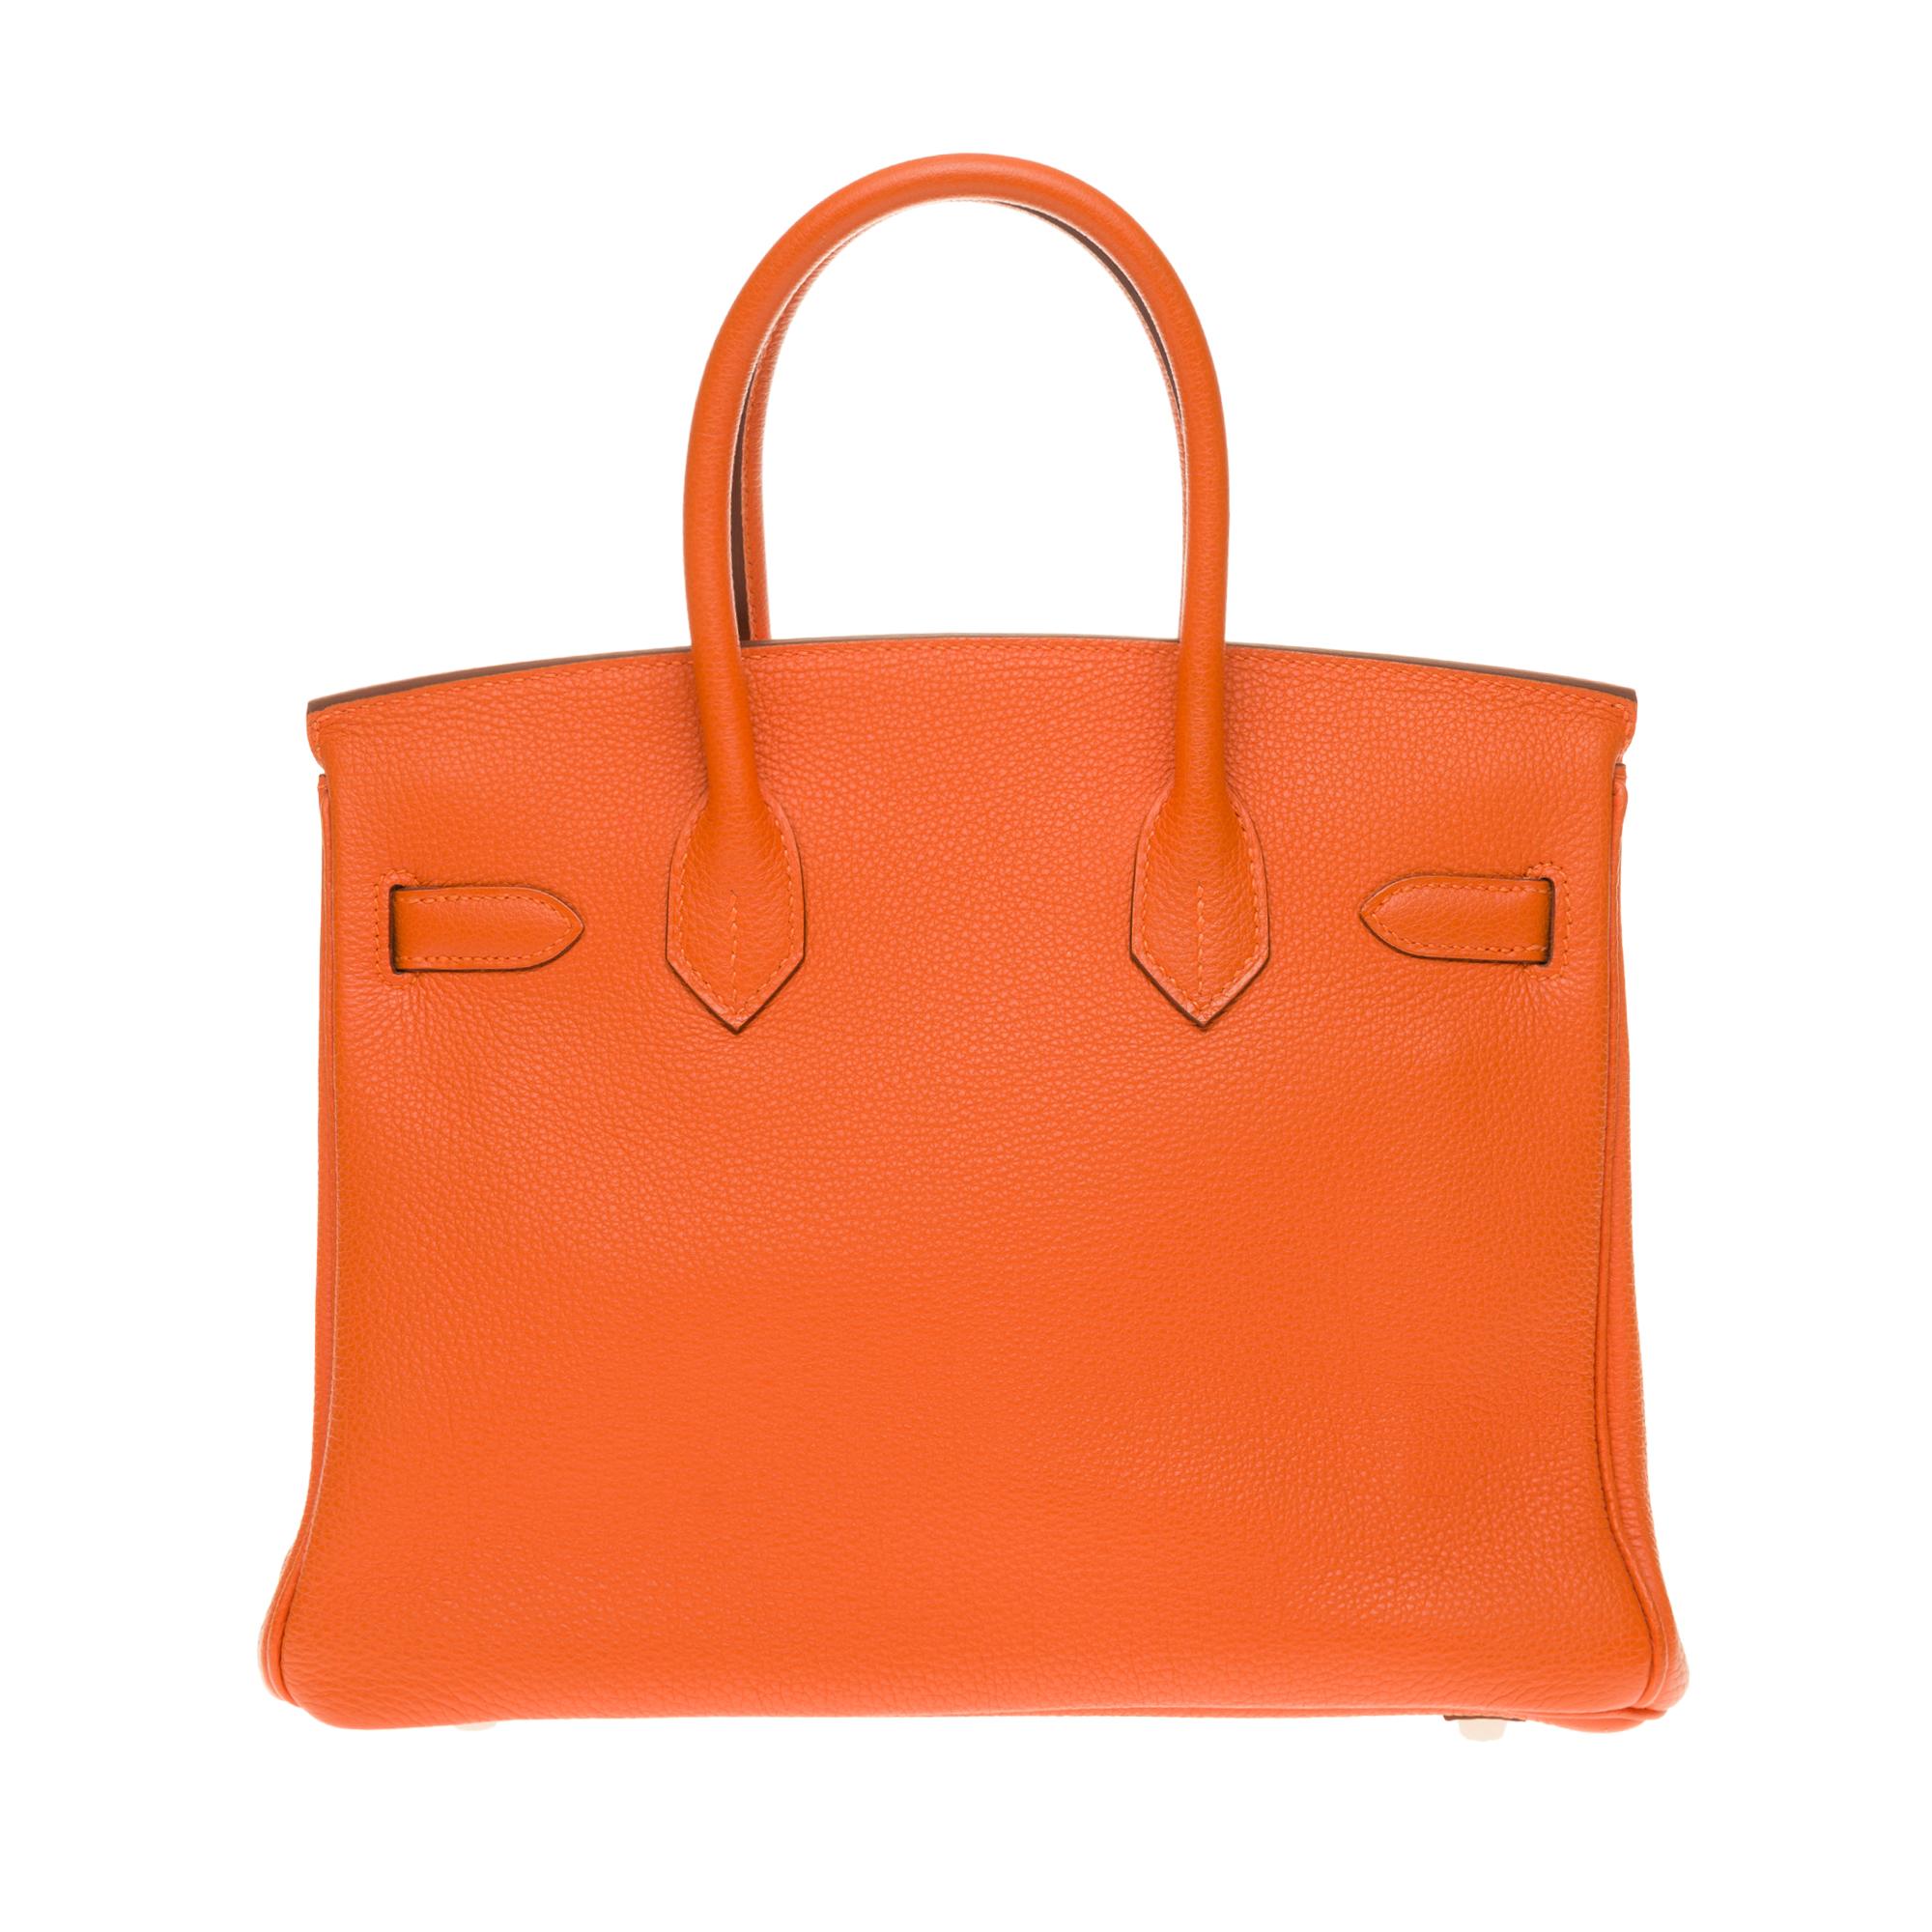 Exceptional Hermes Birkin handbag 30 cm in orange Togo leather, palladium metal hardware, orange stitching, double orange leather handle allowing a handheld

Closure by flap
Orange leather inner lining, one zipped pocket, one patch pocket
Sold with